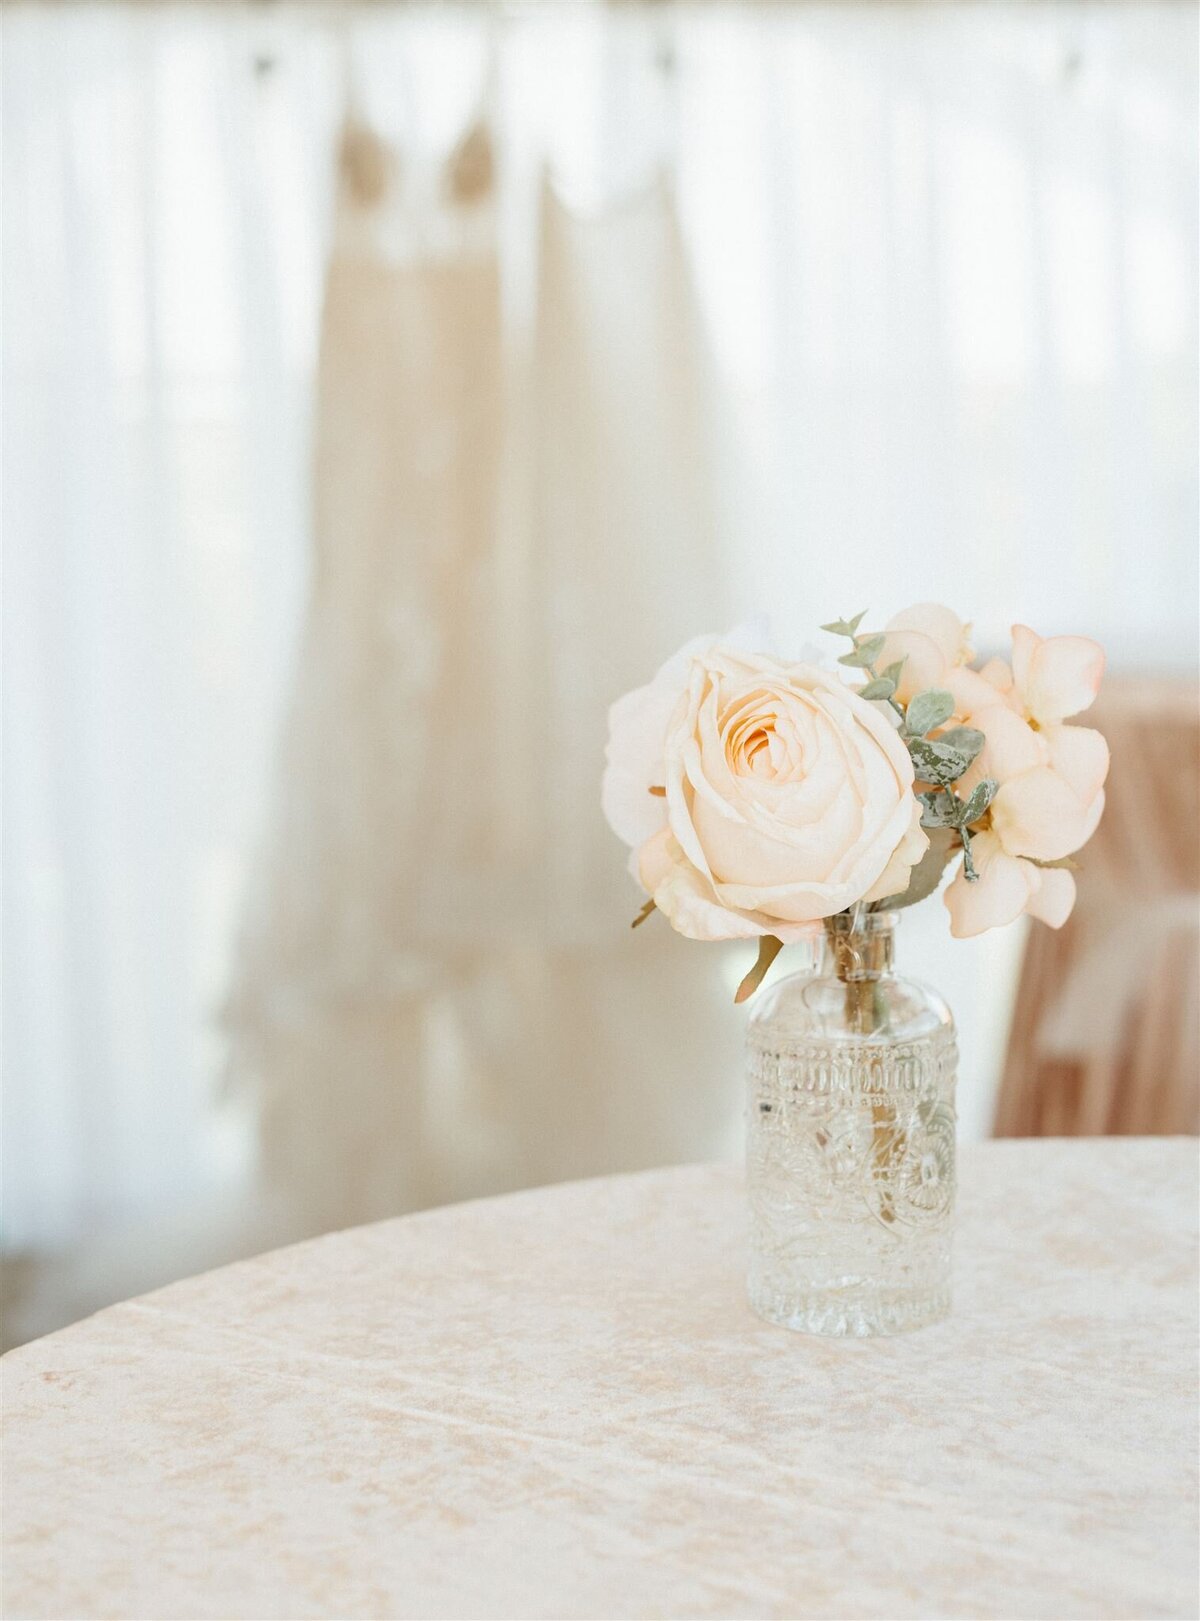 flowers with wedding dress in the background